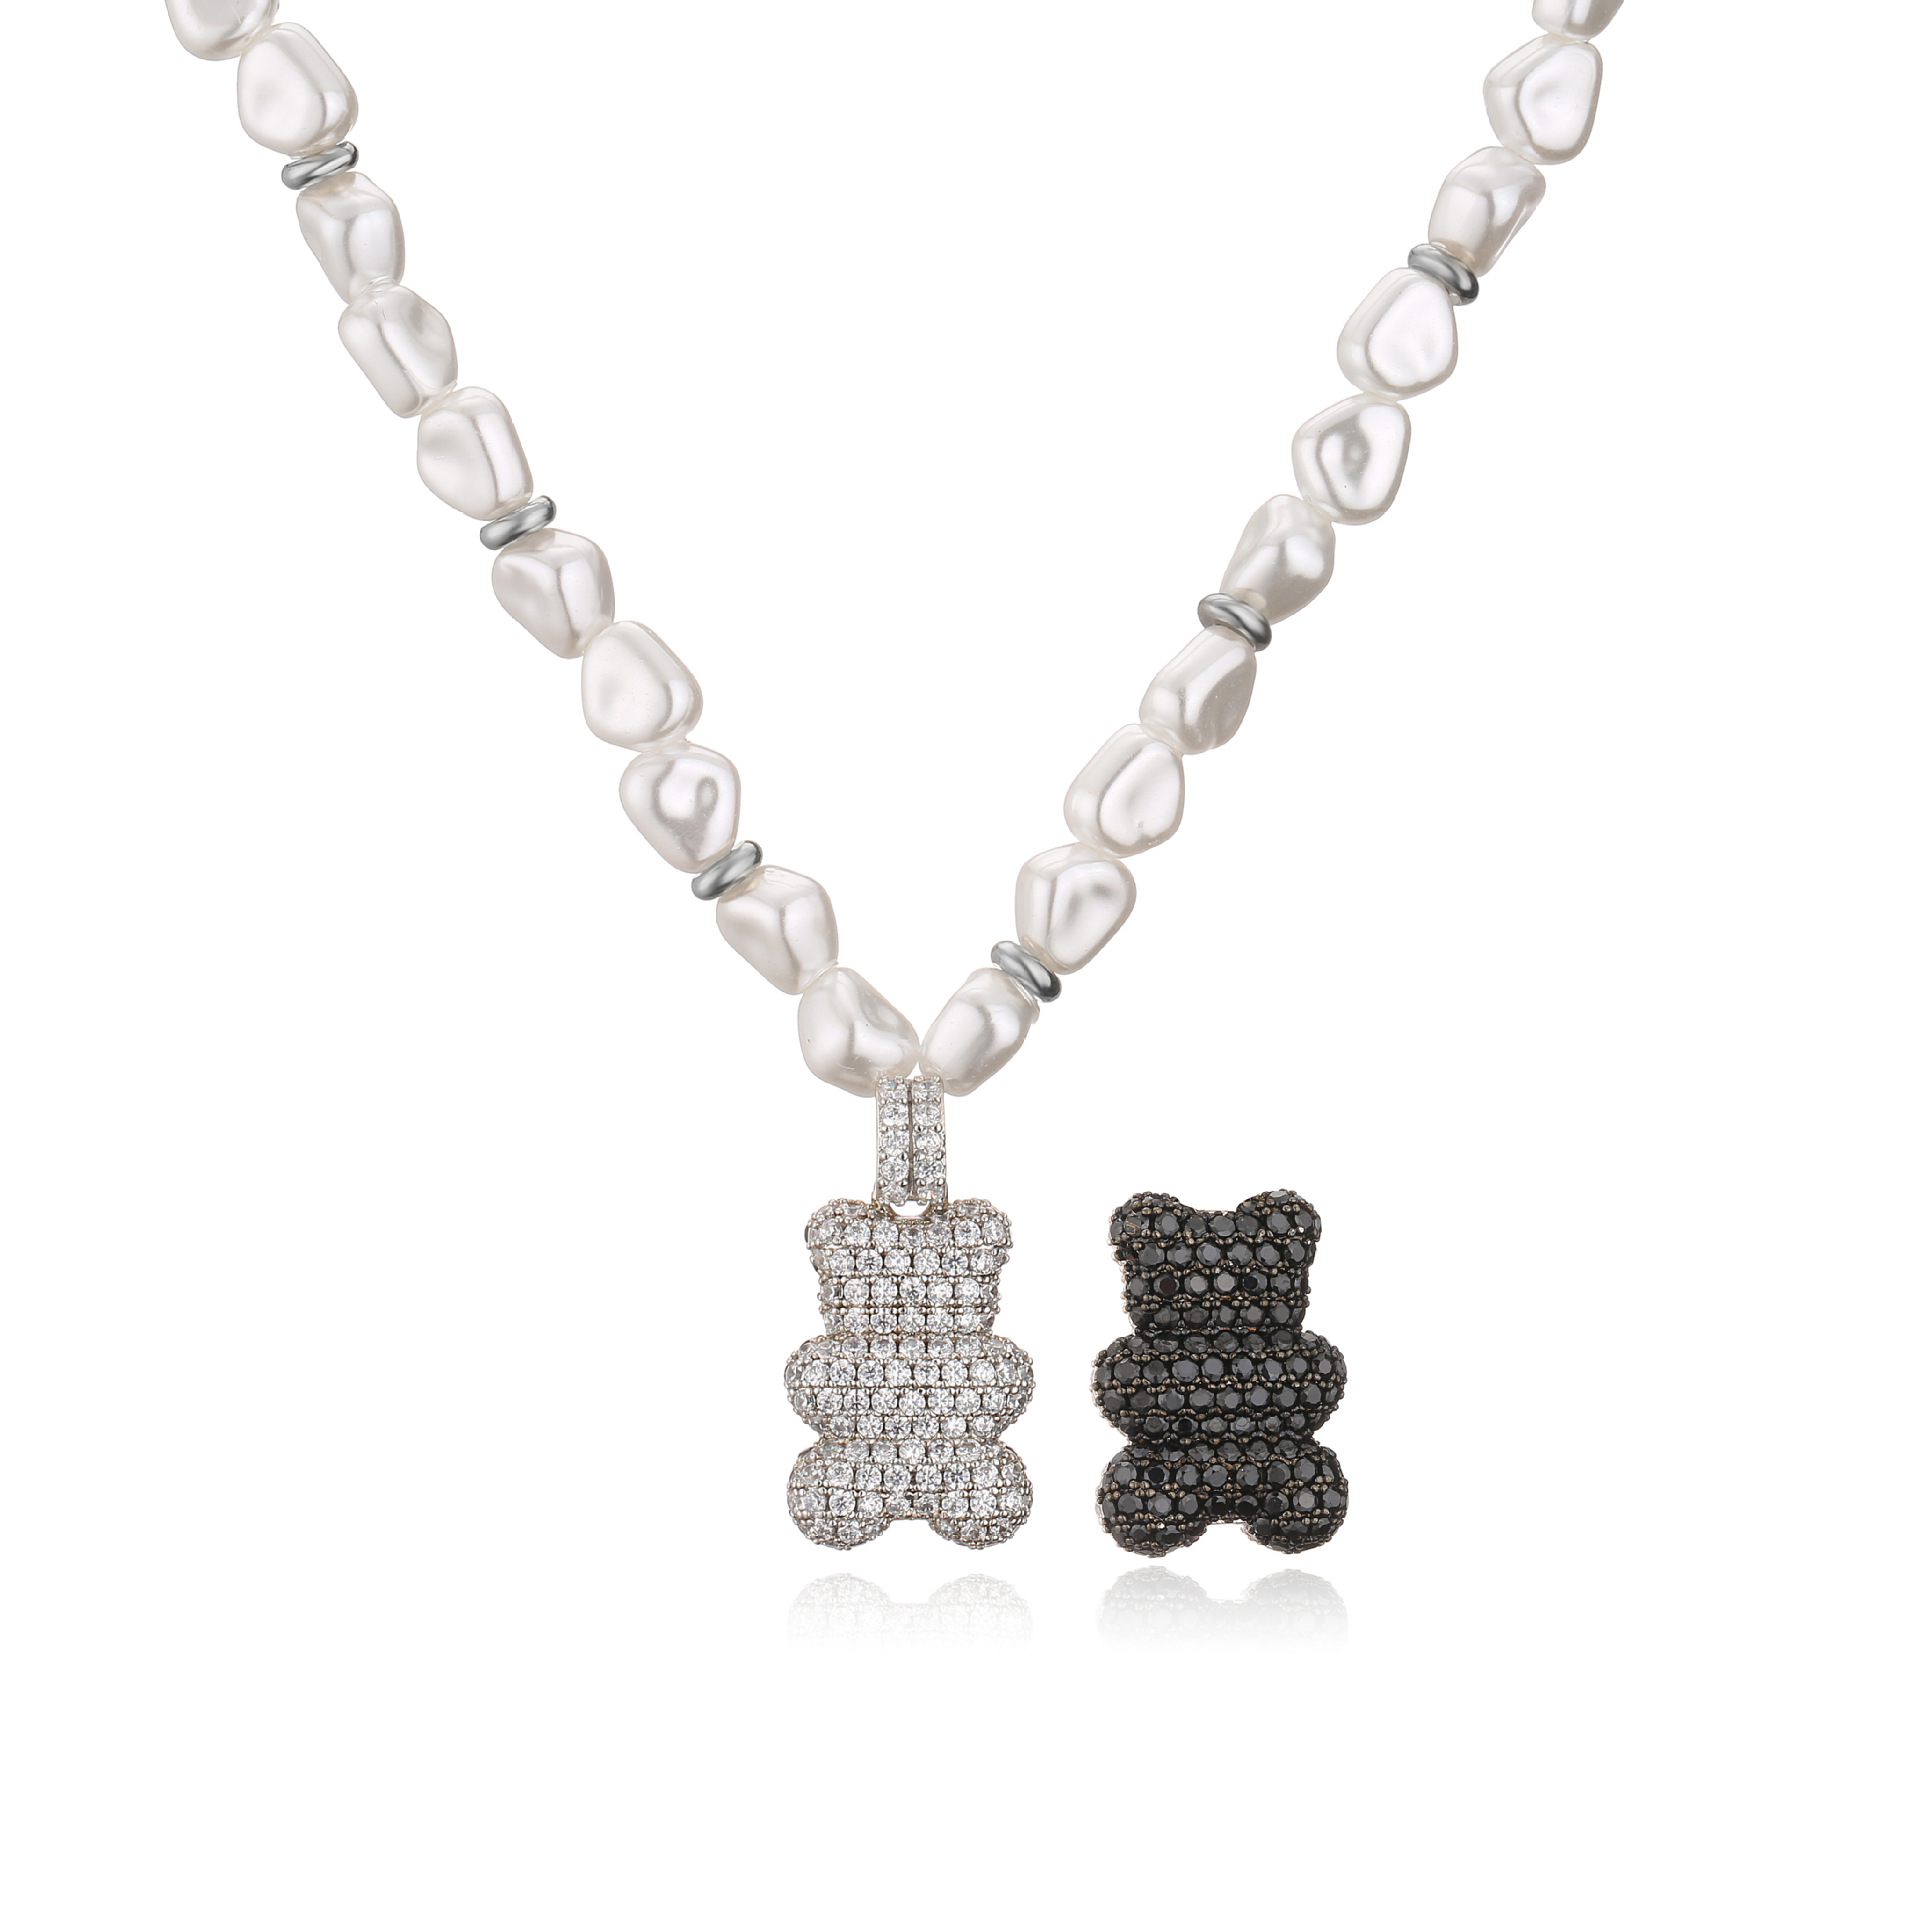 9:Black and white bear pearl necklace